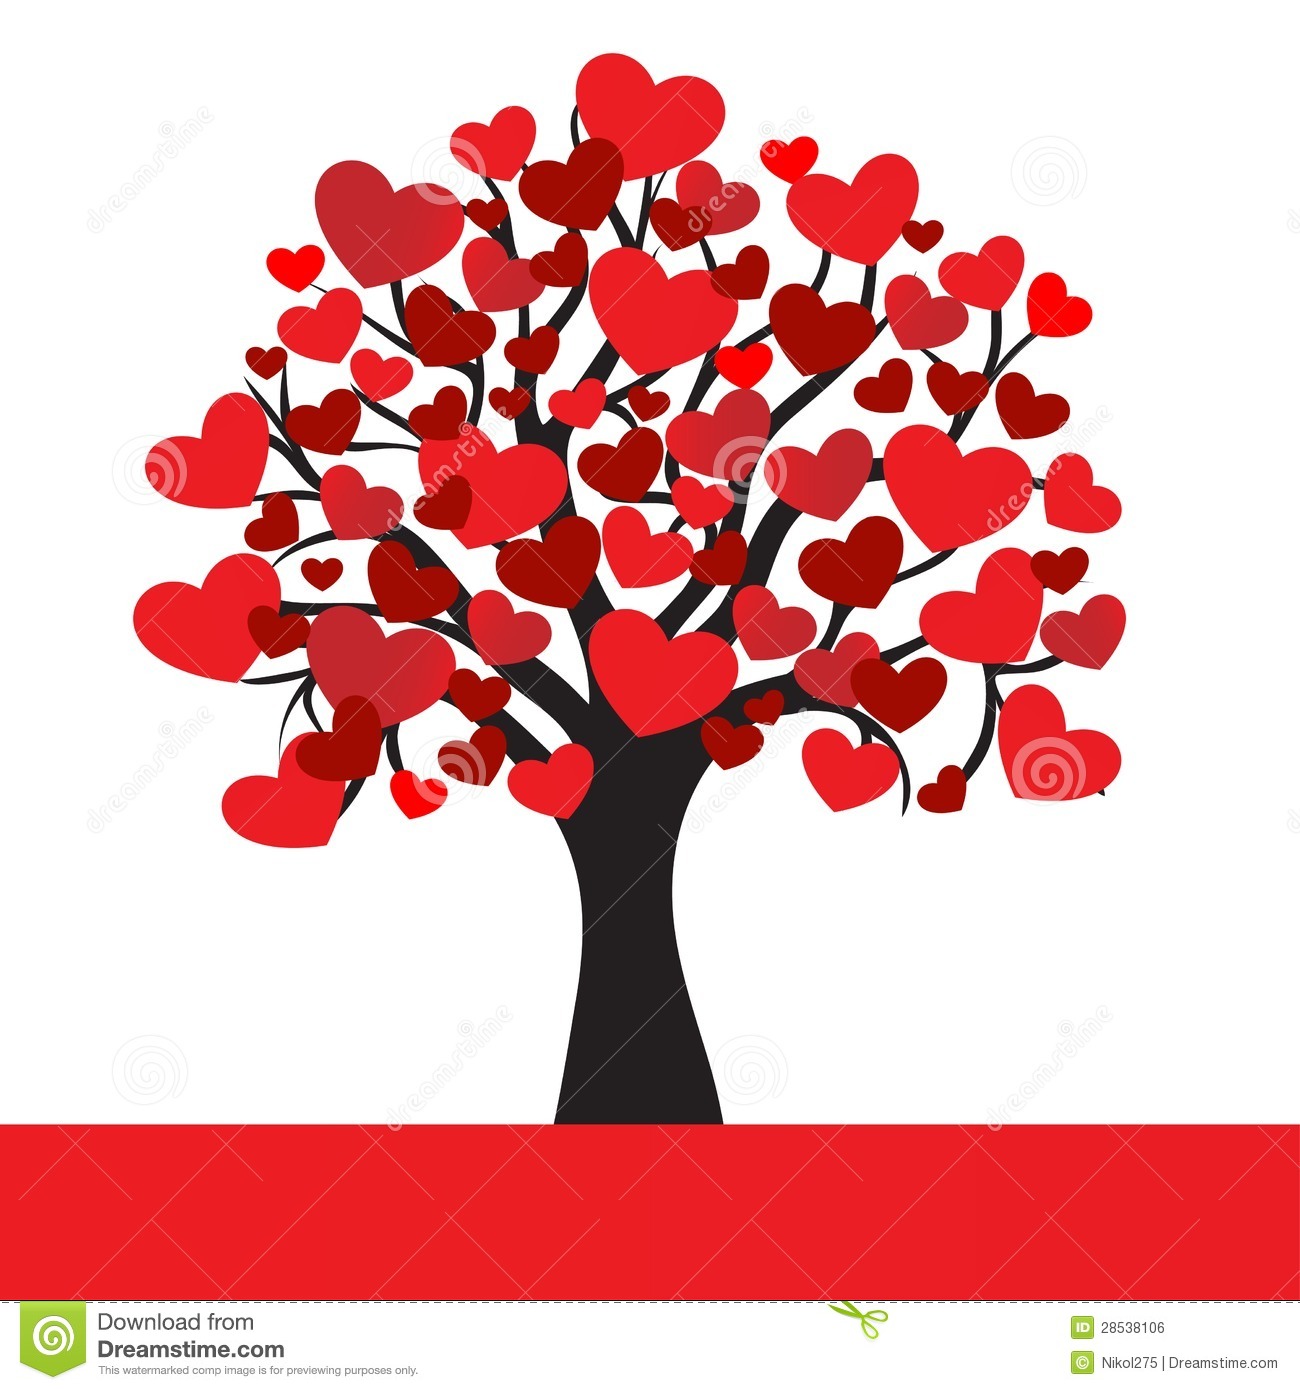 Tree with Heart